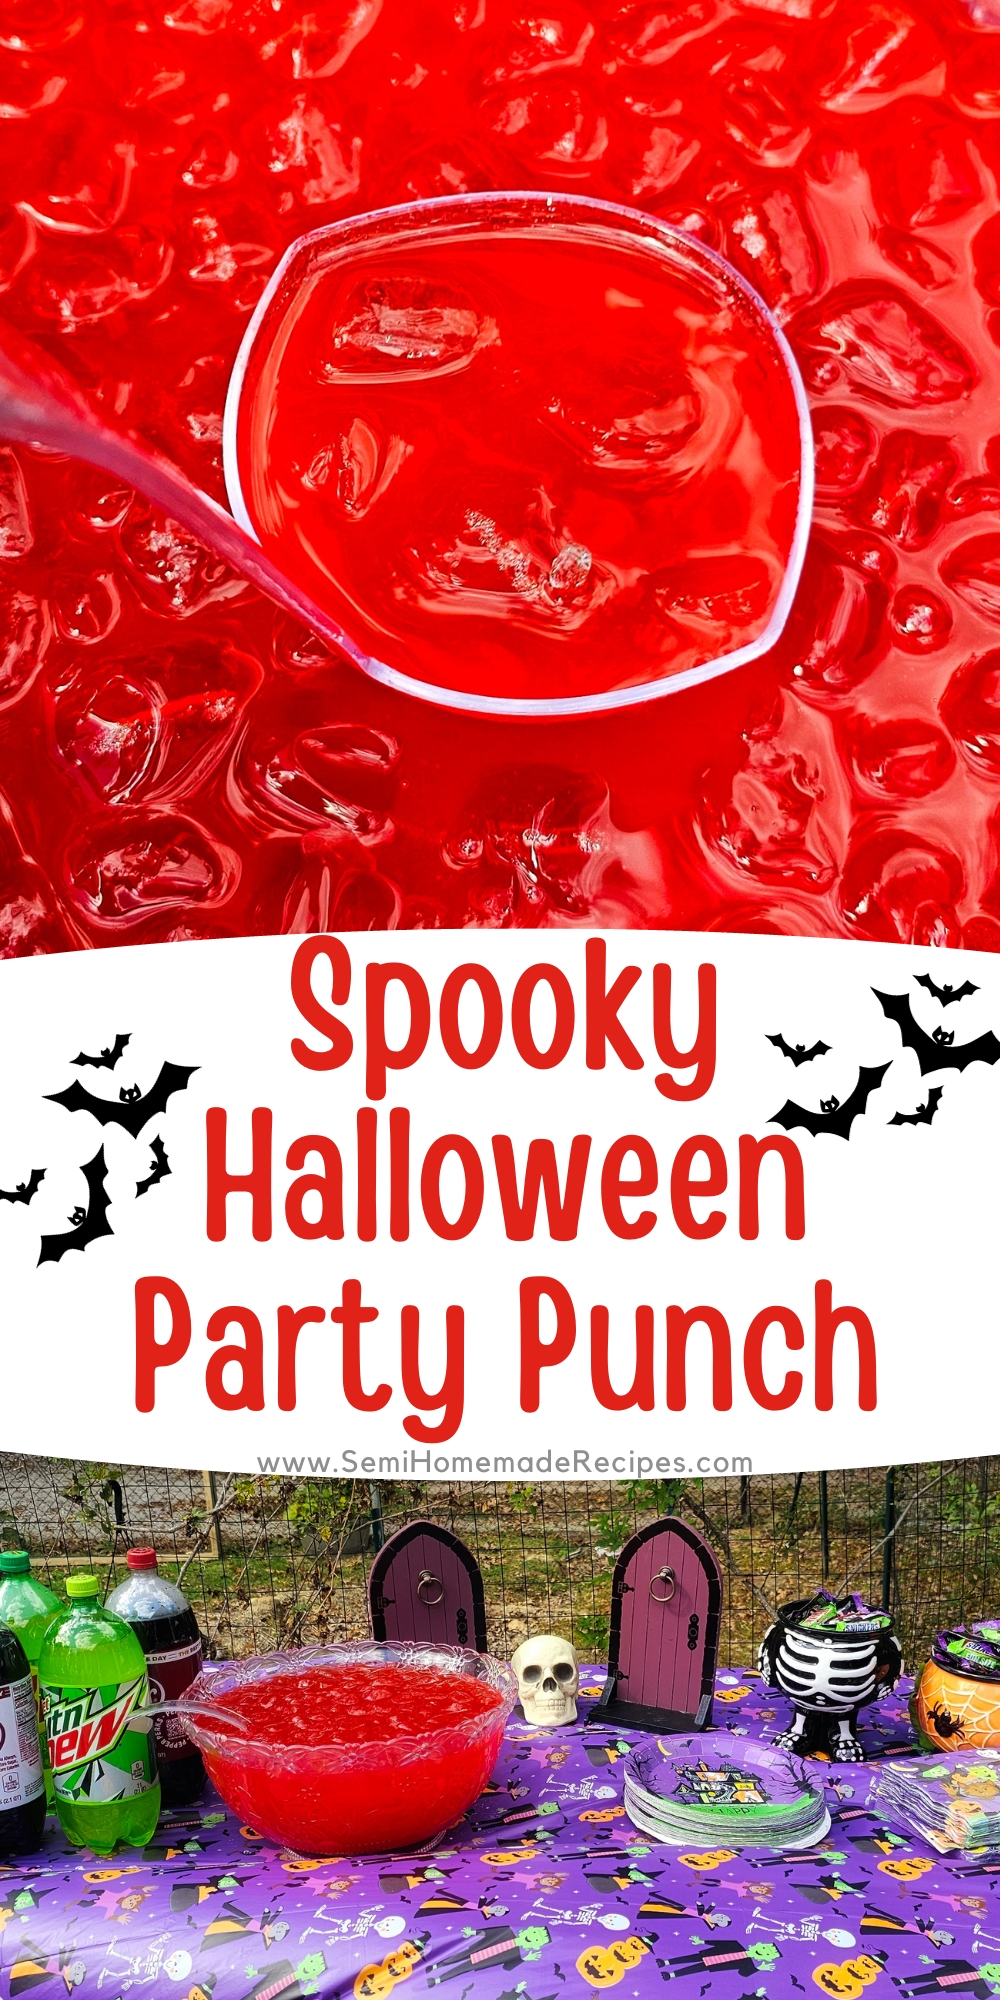 Get ready to brew up a spine-chilling concoction that will leave your Halloween party guests bewitched. This hauntingly delicious Spooky Halloween Party Punch combines a mix of ghoulishly good flavors, perfectly balanced to create a spooky sensation in every sip.